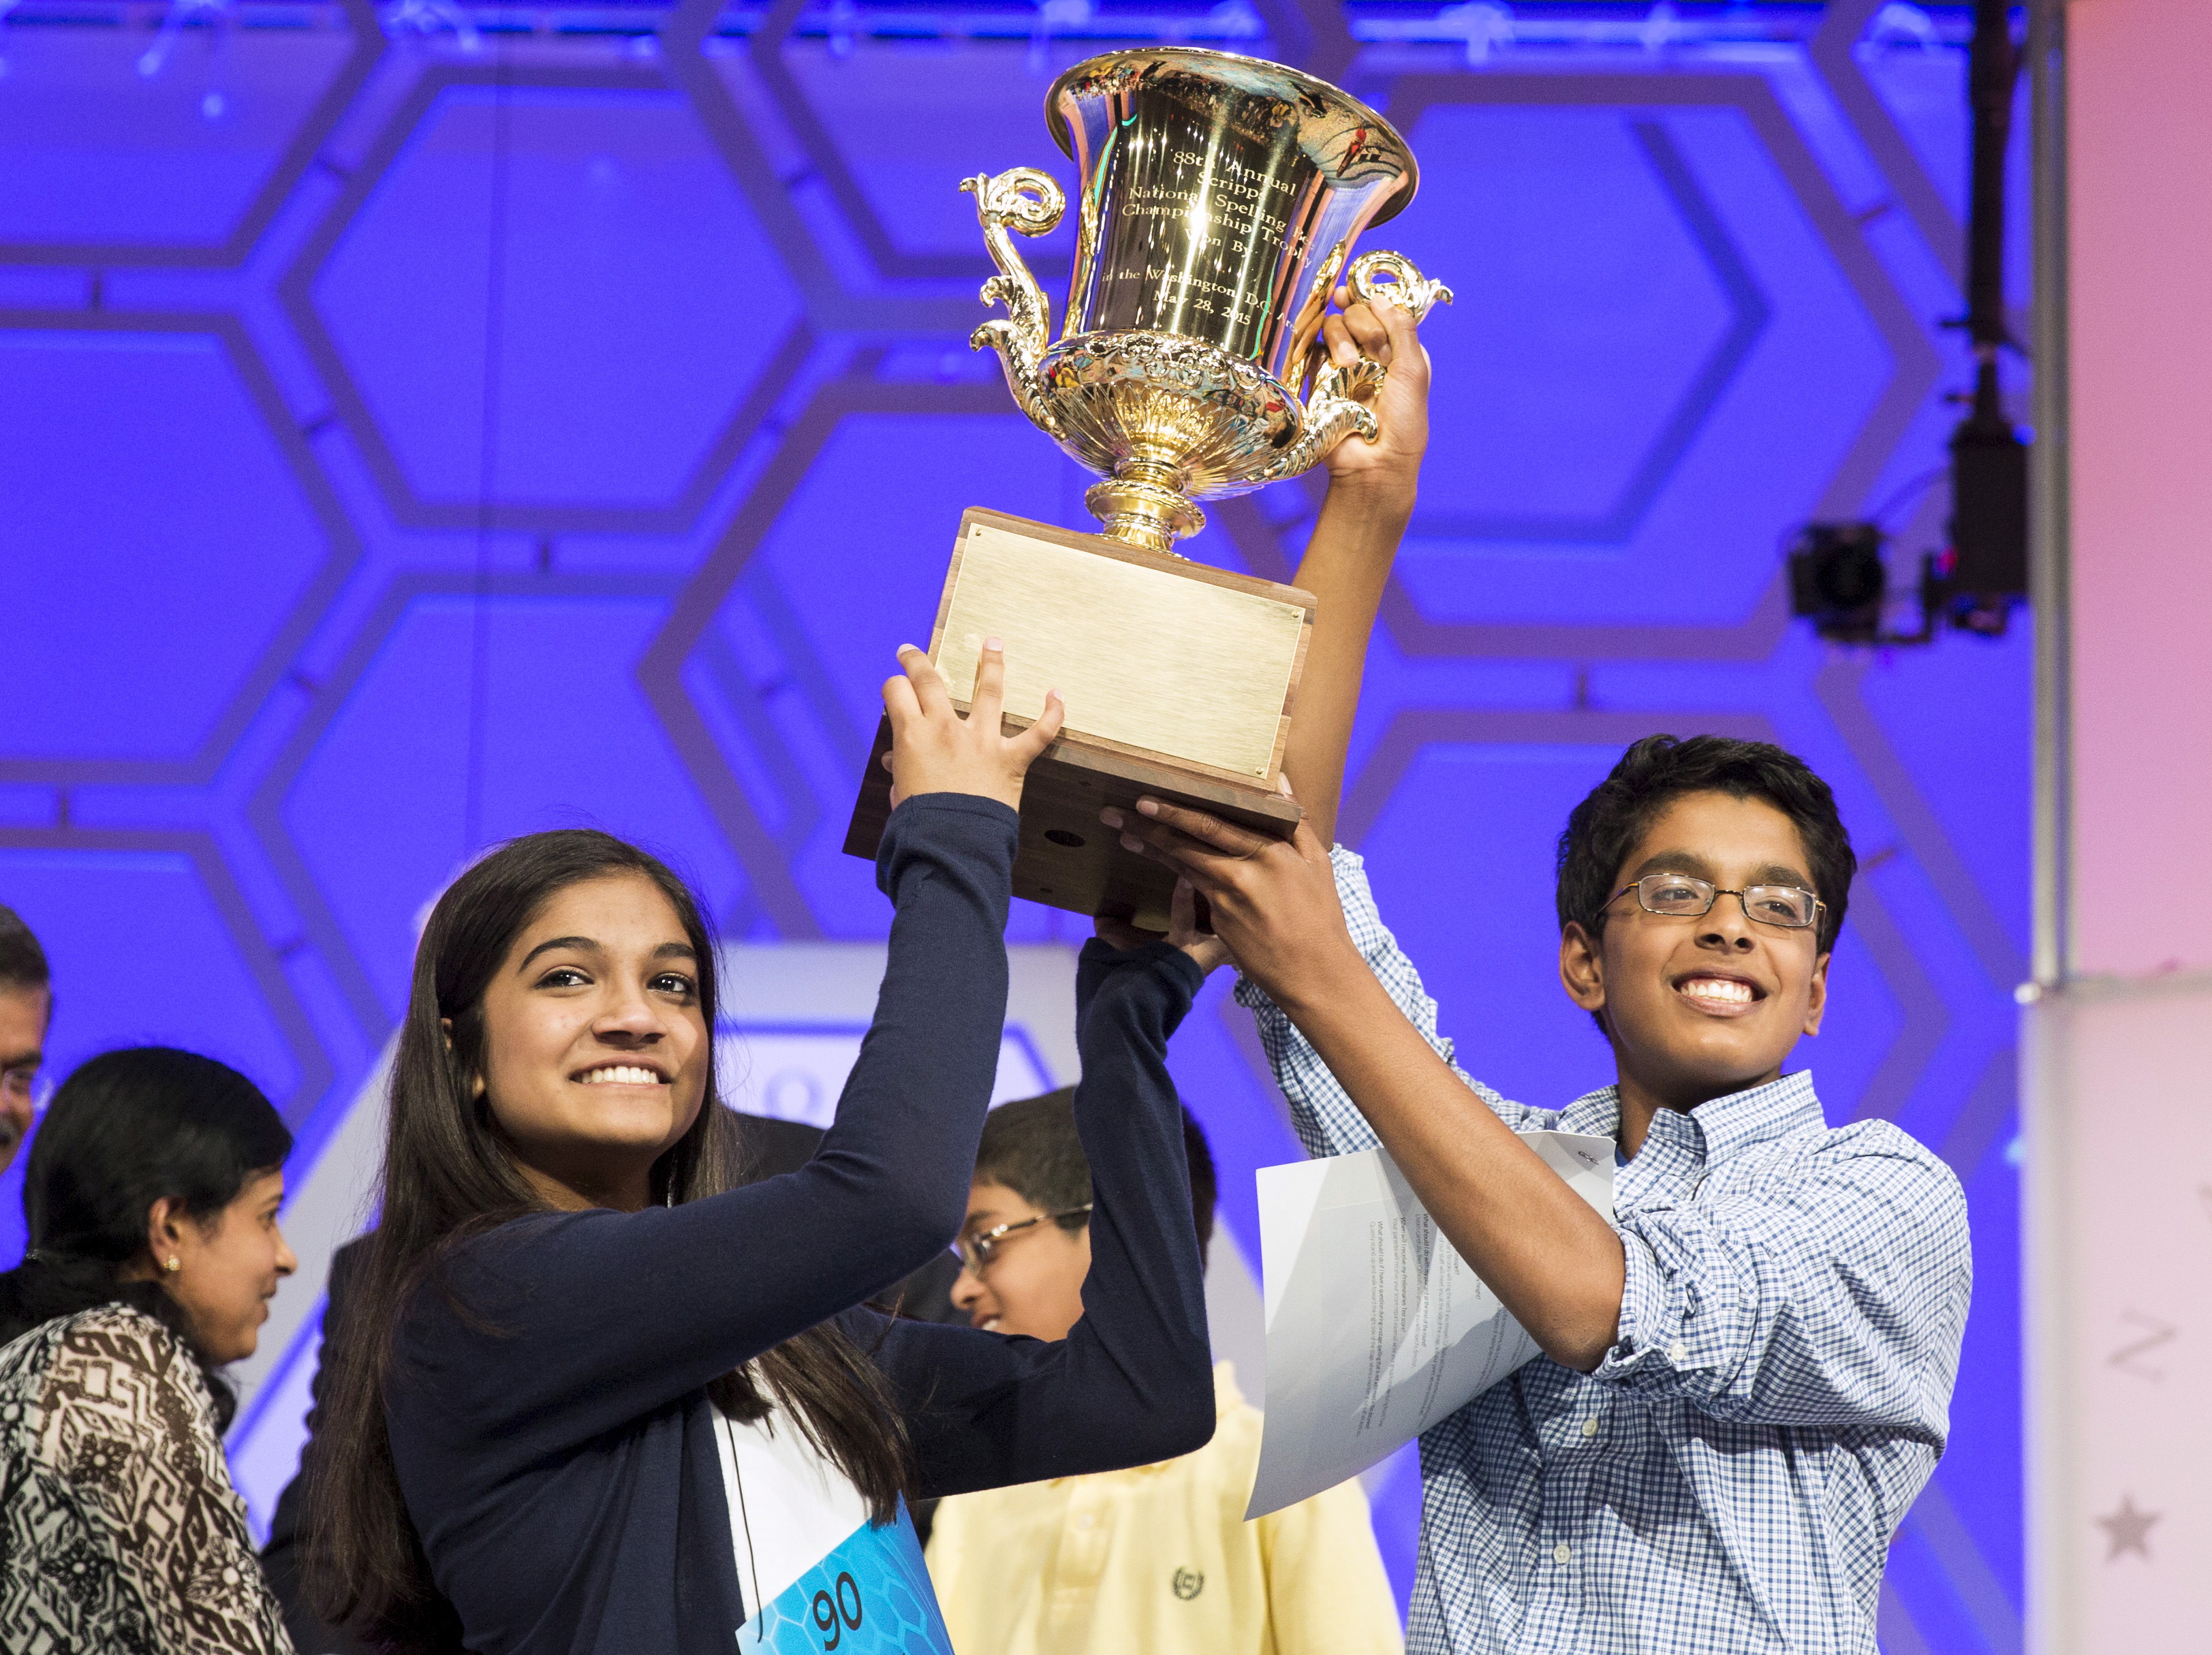 Vanya Shivashankar of Olathe, Kansas, and Gokul Venkatachalam, St. Louis Missouri lift the trophy after becoming co-champions after the final round of the 88th annual Scripps National Spelling Bee